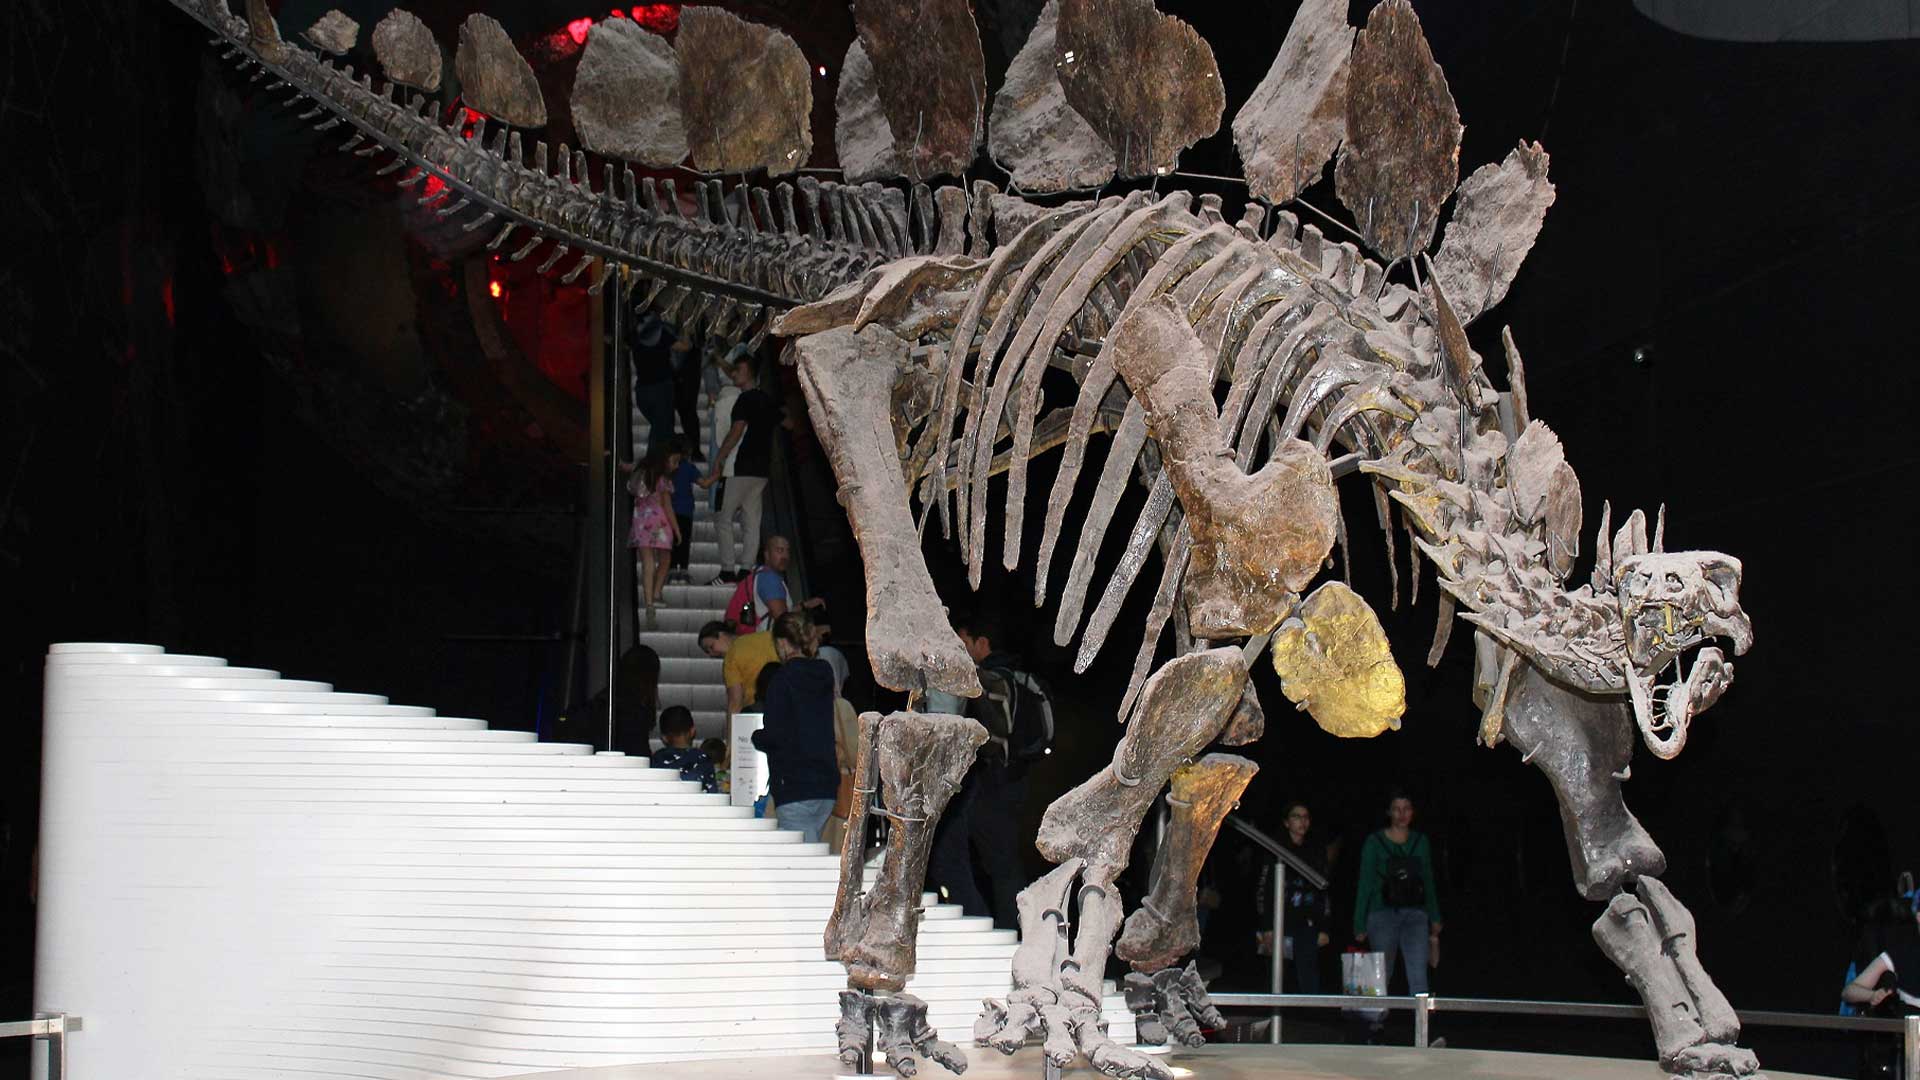 “Sophie” the Stegosaurus has been on display at the London Natural History Museum since late 2014.